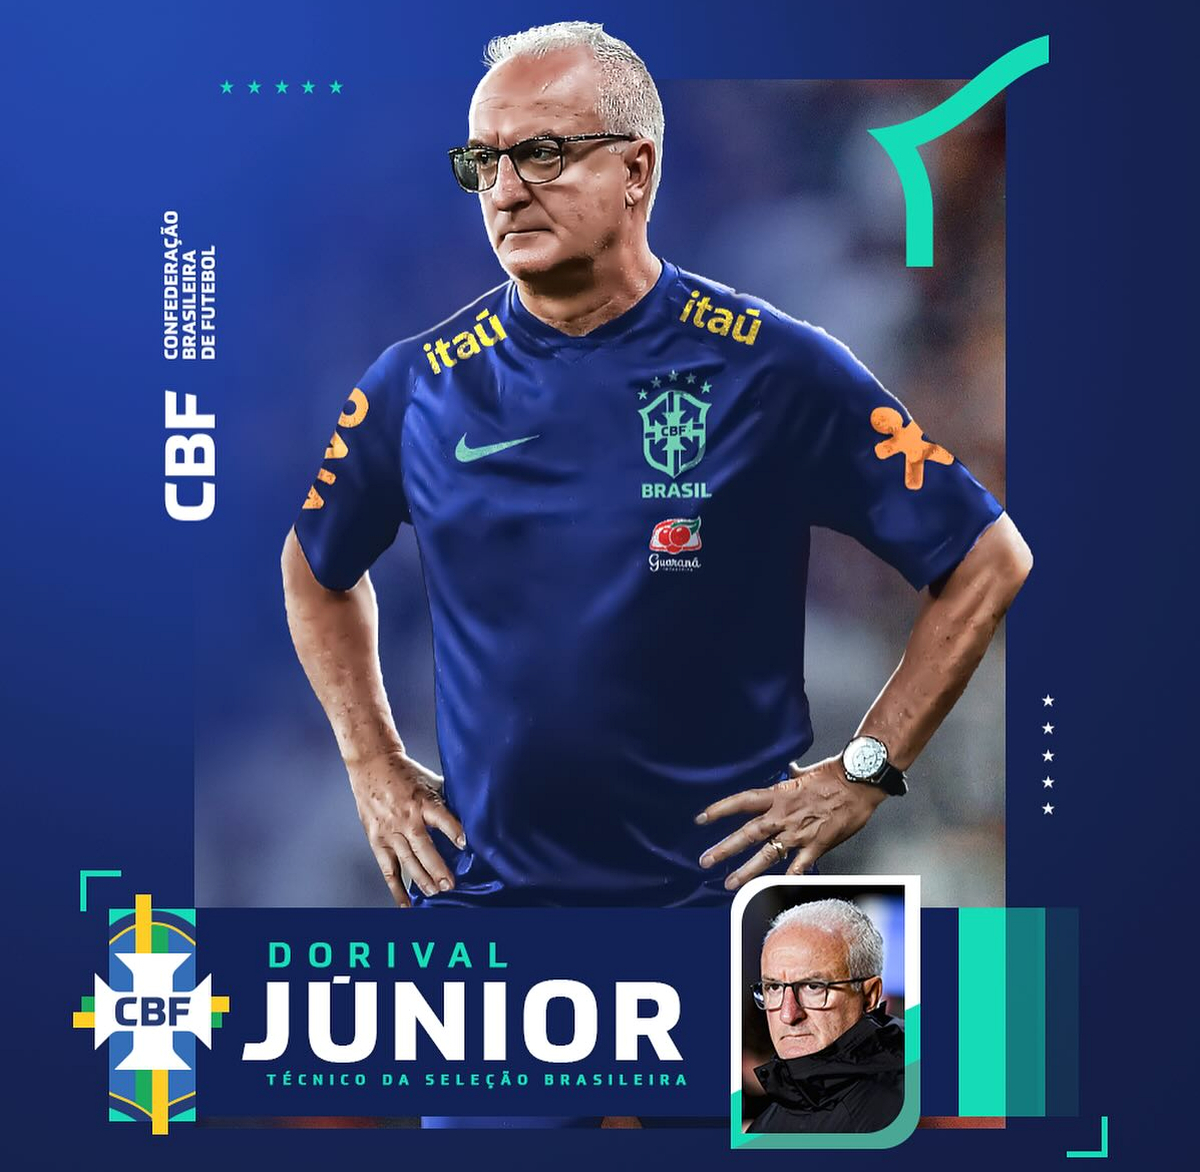 It's official. Dorival Junior is the head coach of the Brazilian